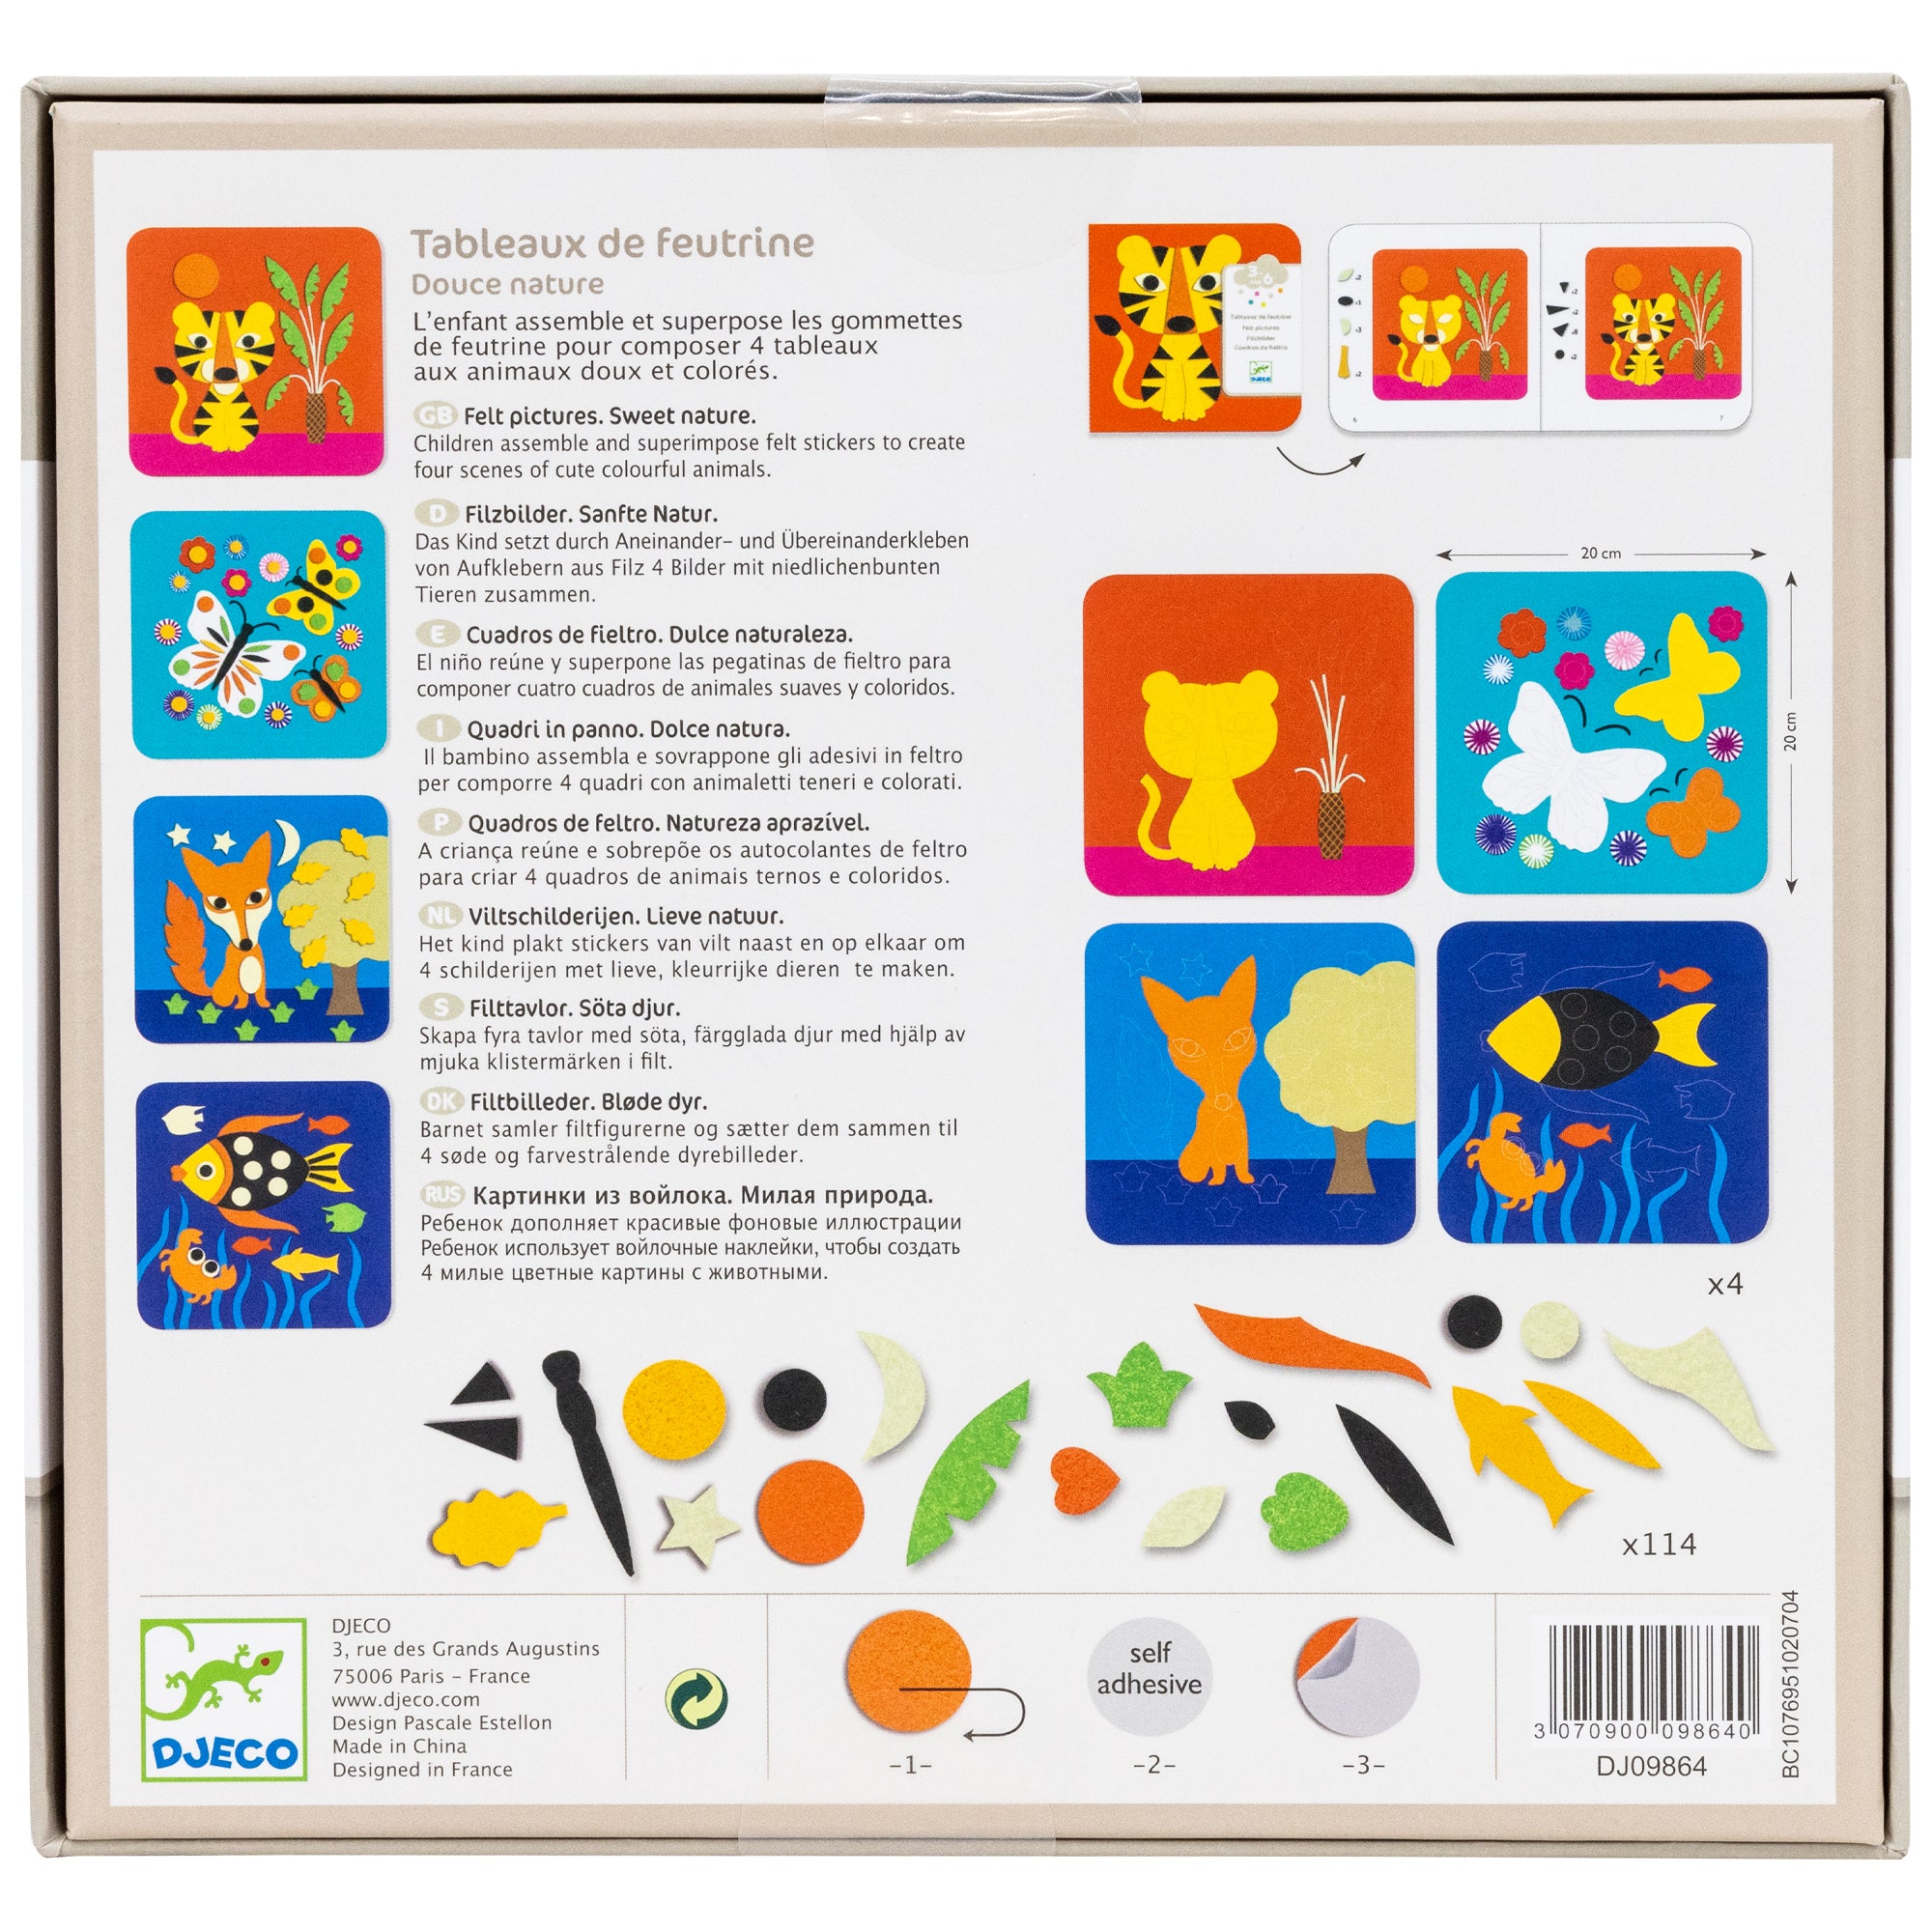 The Djeco Sweet Nature Felt set box back. On the left and down are pictures of the completed projects. From the top down is a tiger, butterflies, a fox, and a fish. On the right, it shows the boards and contents of each set. The instruction book is open at the top to show the steps of assembling.